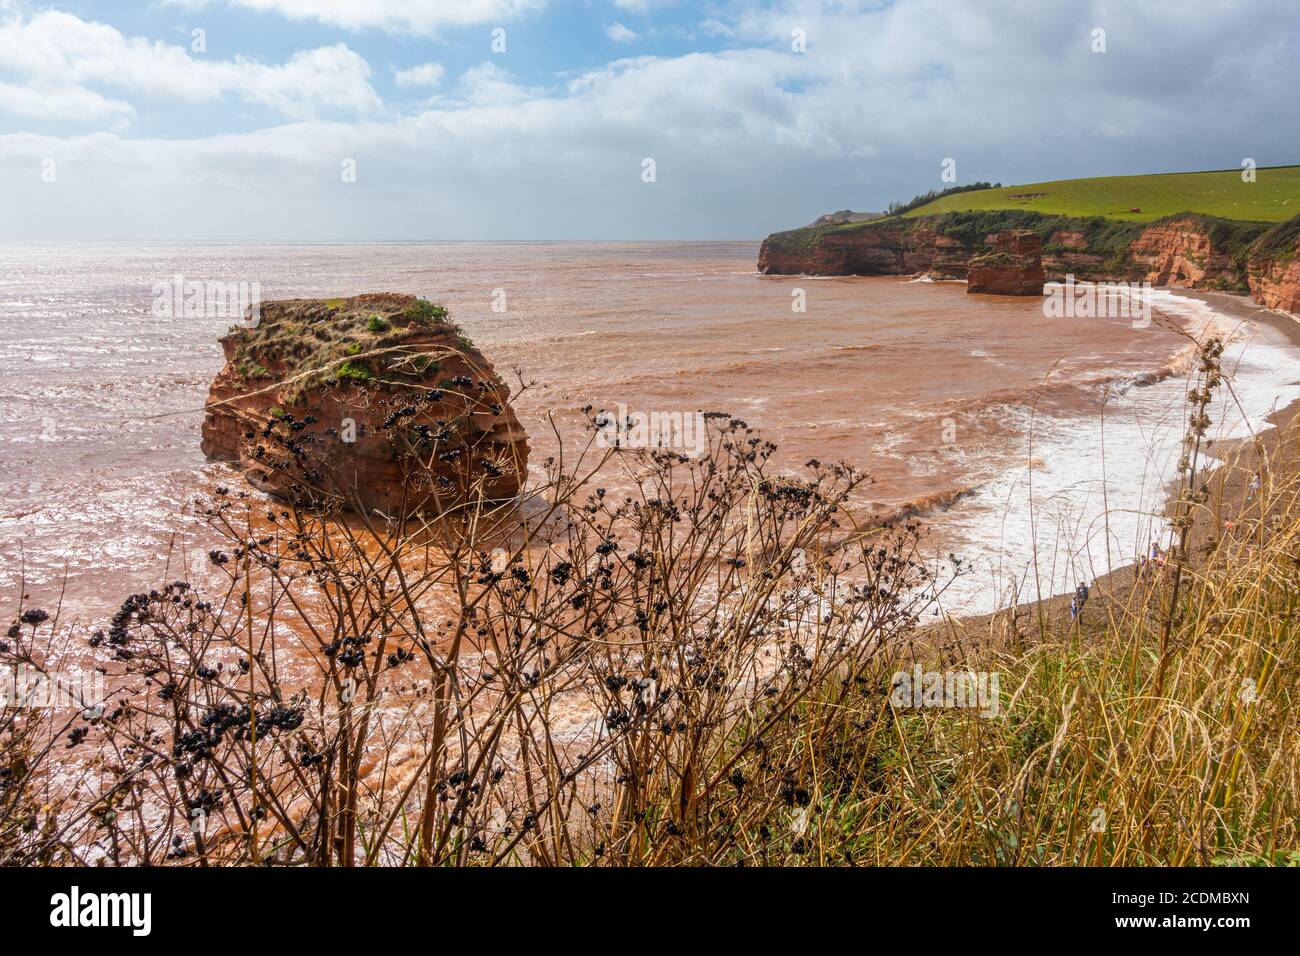 Waves breaking onto the beach at Ladram Bay near Exmouth in South Devon, England, UK. Red sandstone cliffs, part of the Jurassic Coast. Stock Photo